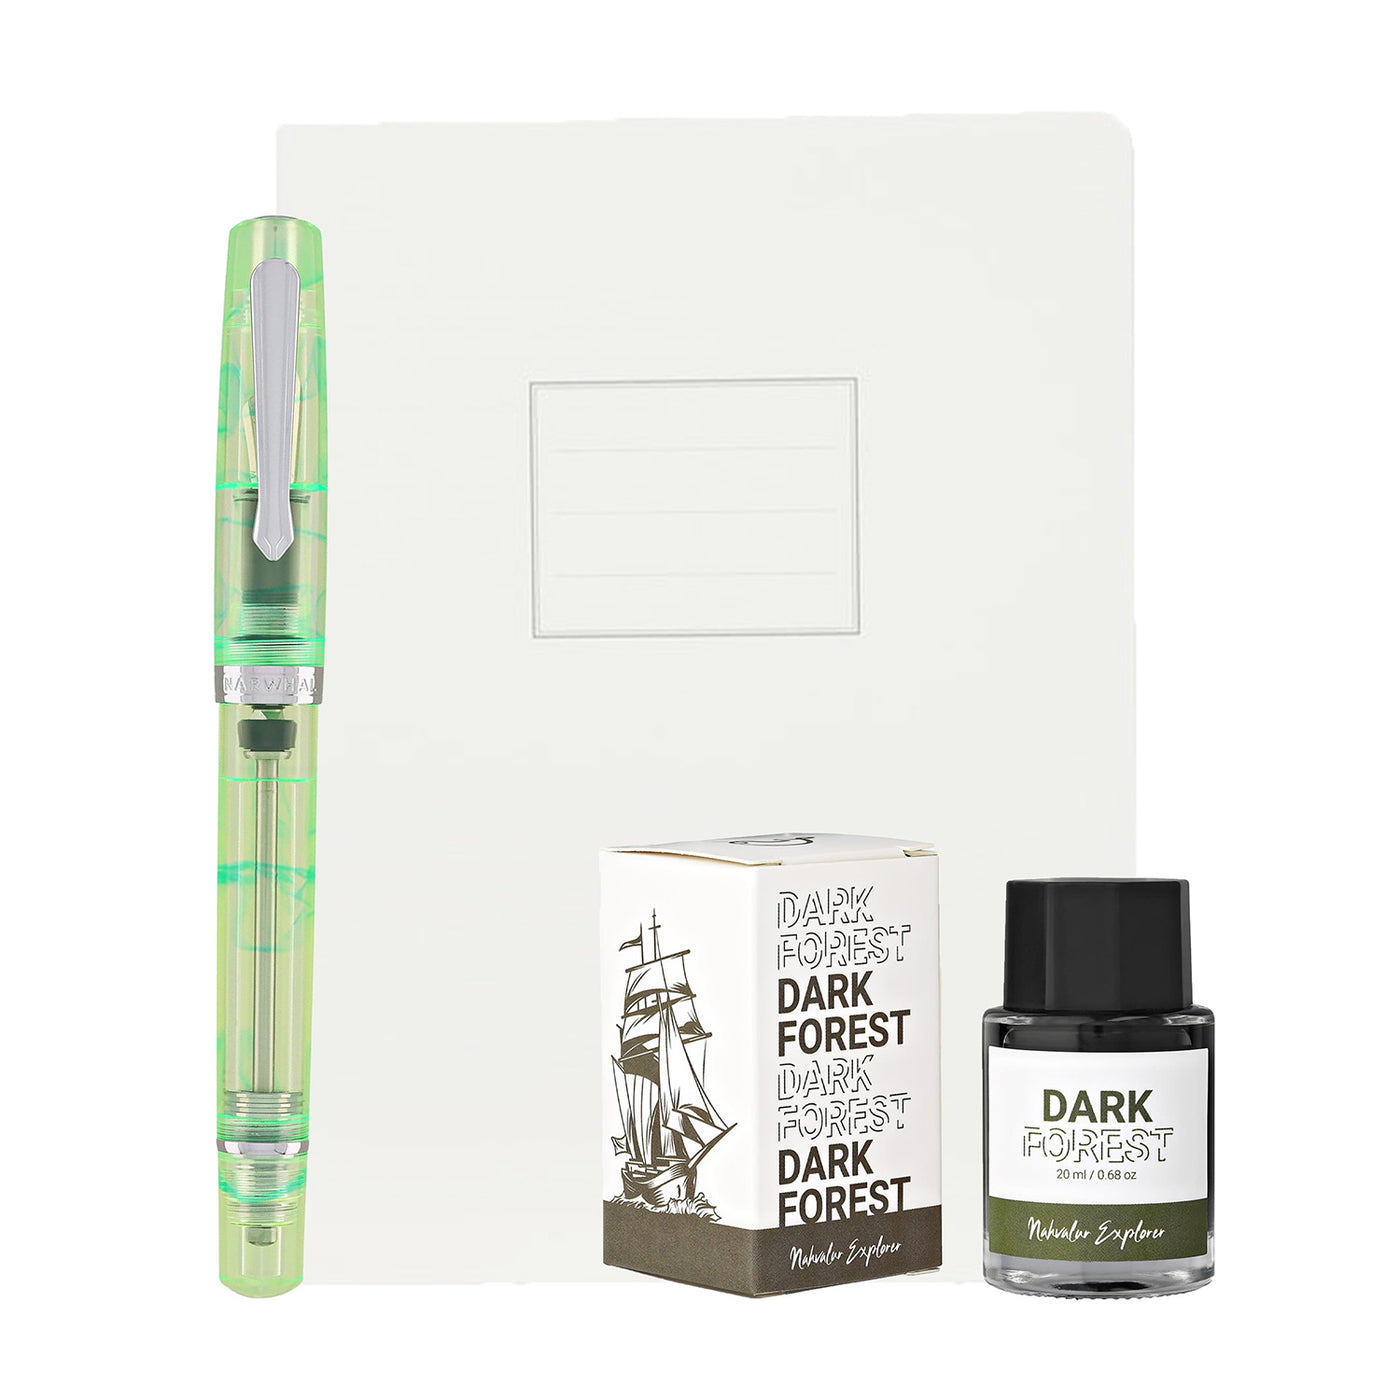 Nahvalur Original Plus Gift Set of Fountain Pen, Notebook & Ink - Altifrons Green 1